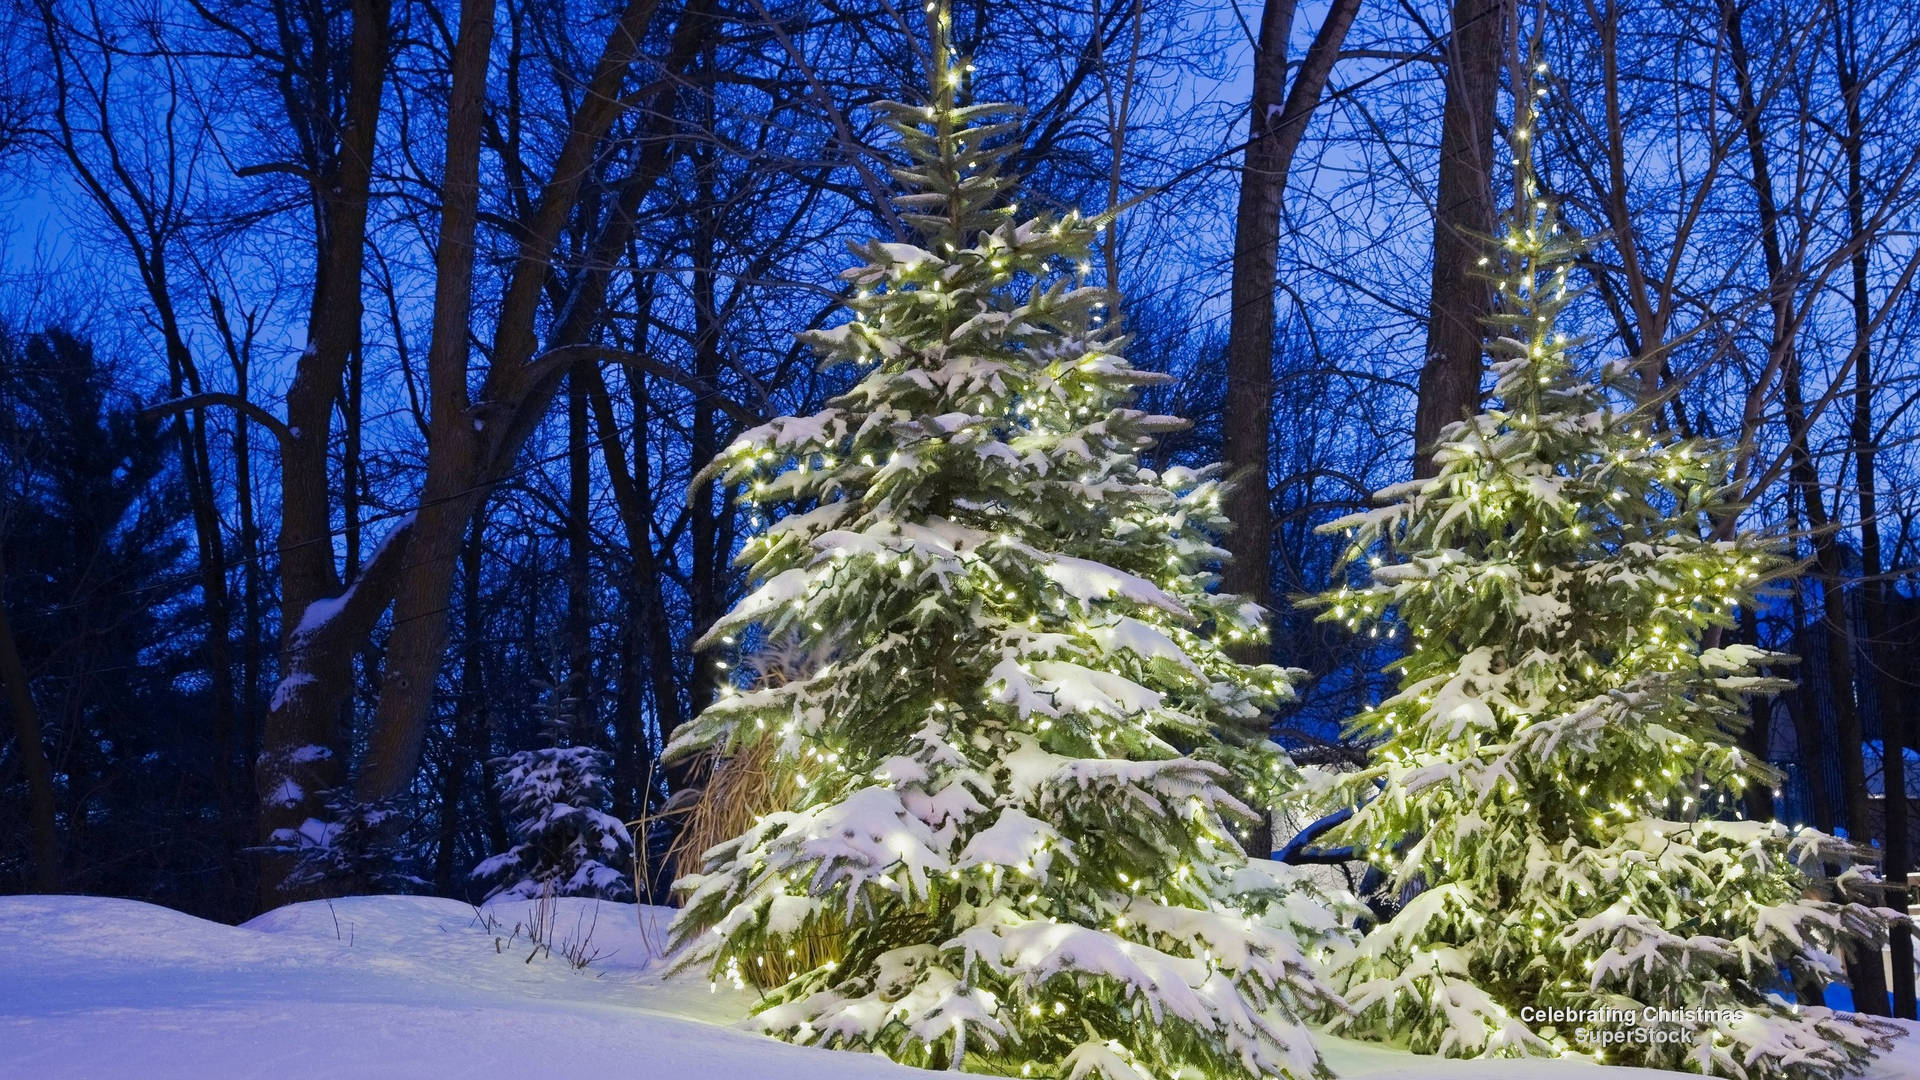 A wonderland of glistening snow and towering evergreen trees, the perfect setting for your Christmas festivities! Wallpaper